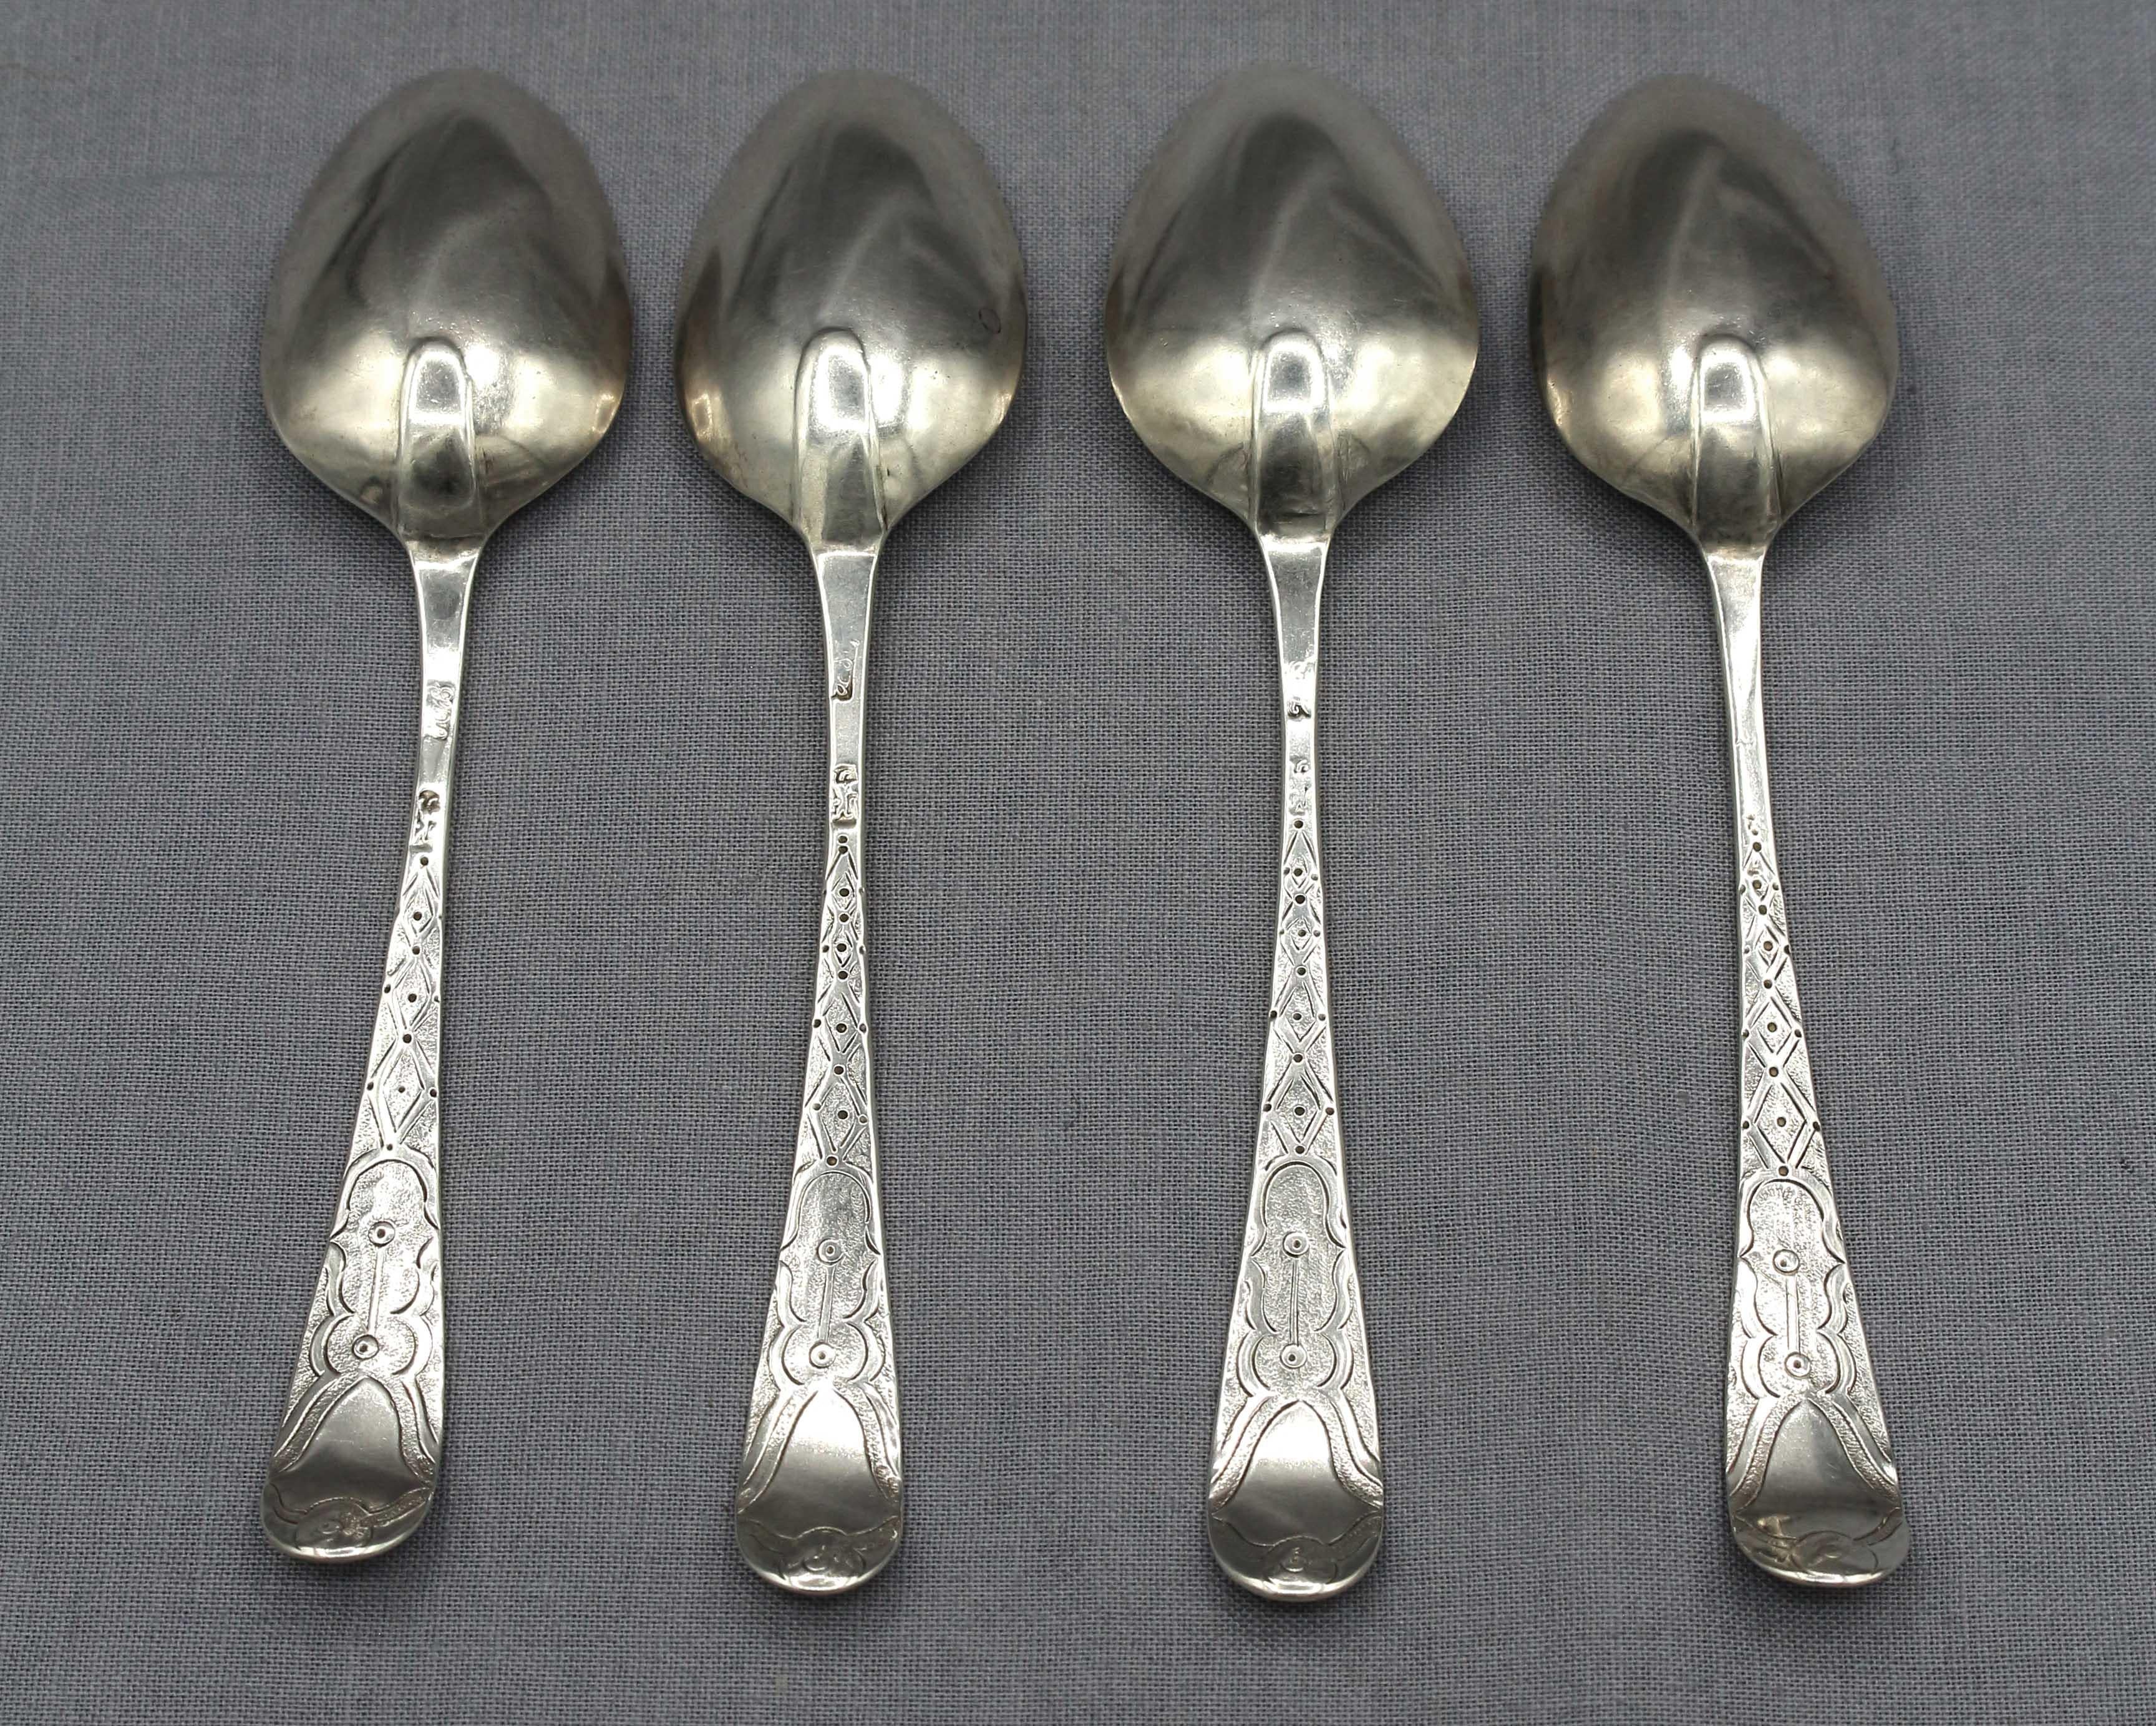 Set of 4 sterling silver coffee spoons by Hester Bateman, London, c.1775. Attractive engraving repeats on the back as well. These are a design well known in her silver. They only have the sterling purity guarantee & her mark, not unsual for small